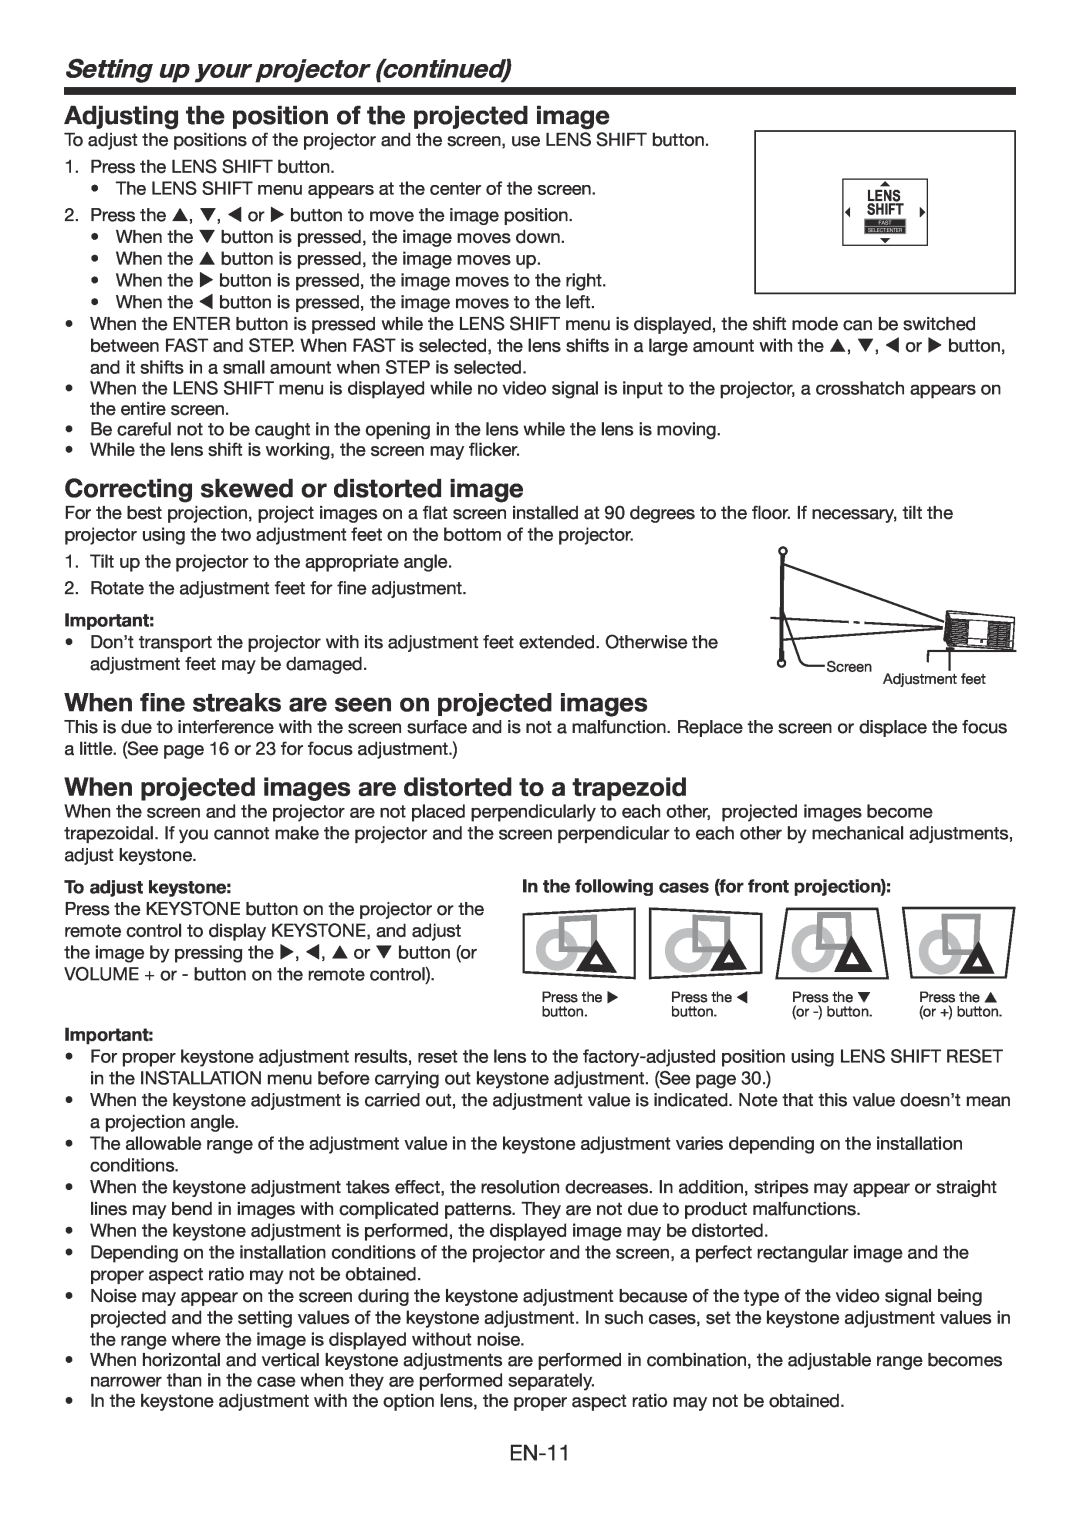 Mitsumi electronic WD3300U user manual Setting up your projector continued, Adjusting the position of the projected image 